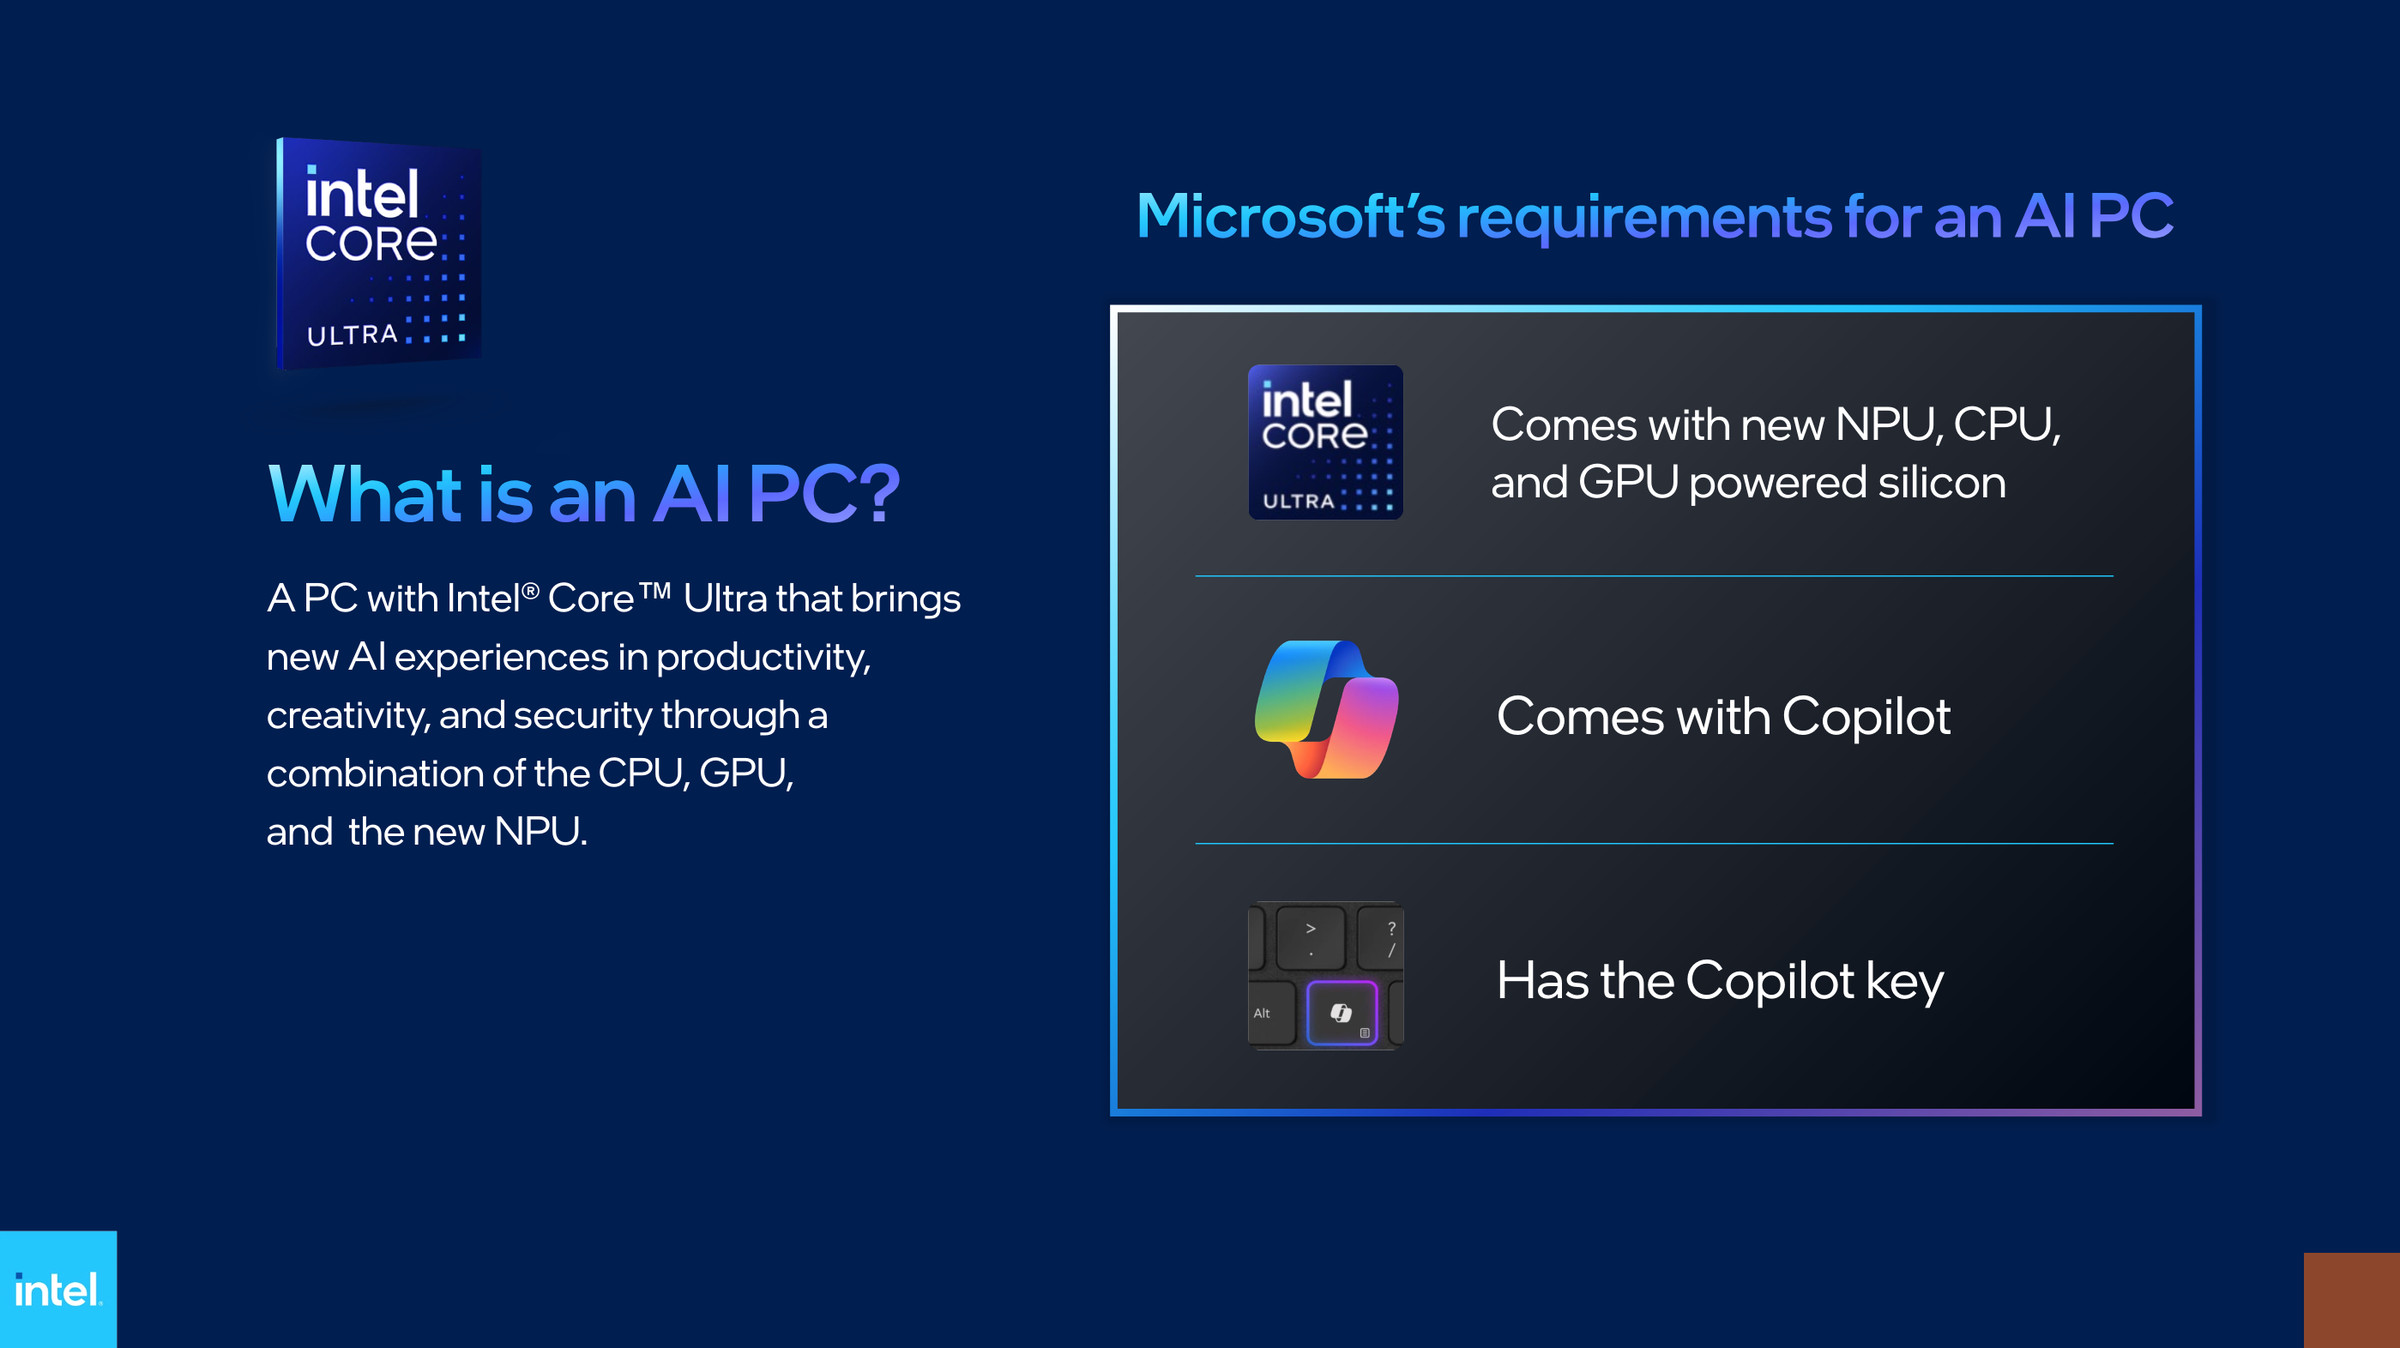 The AI PC requirements.